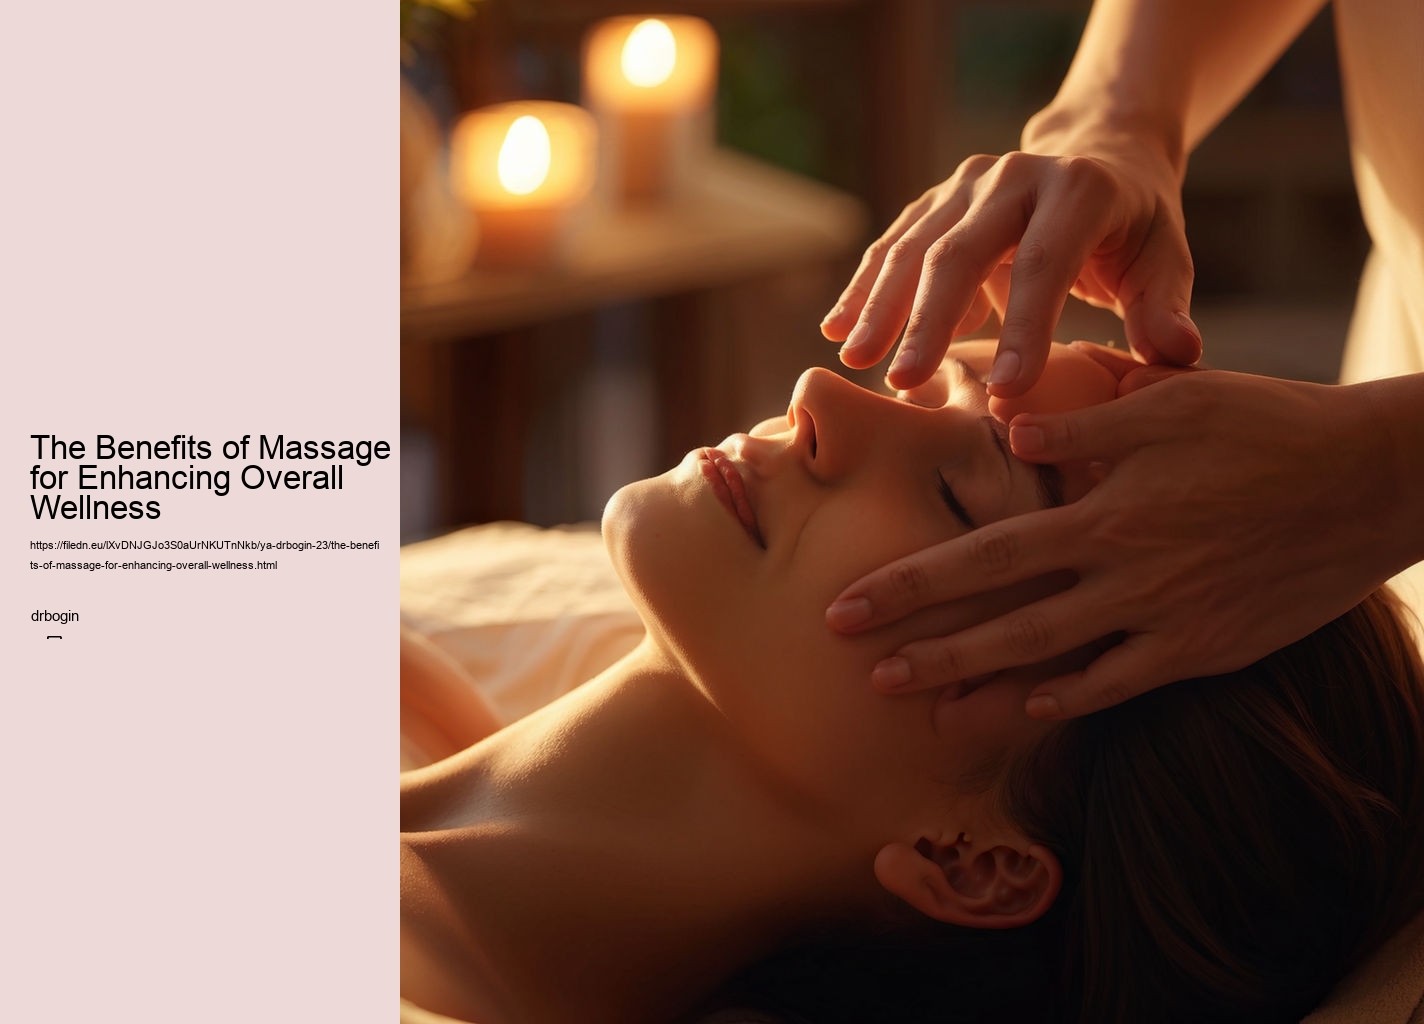 The Benefits of Massage for Enhancing Overall Wellness